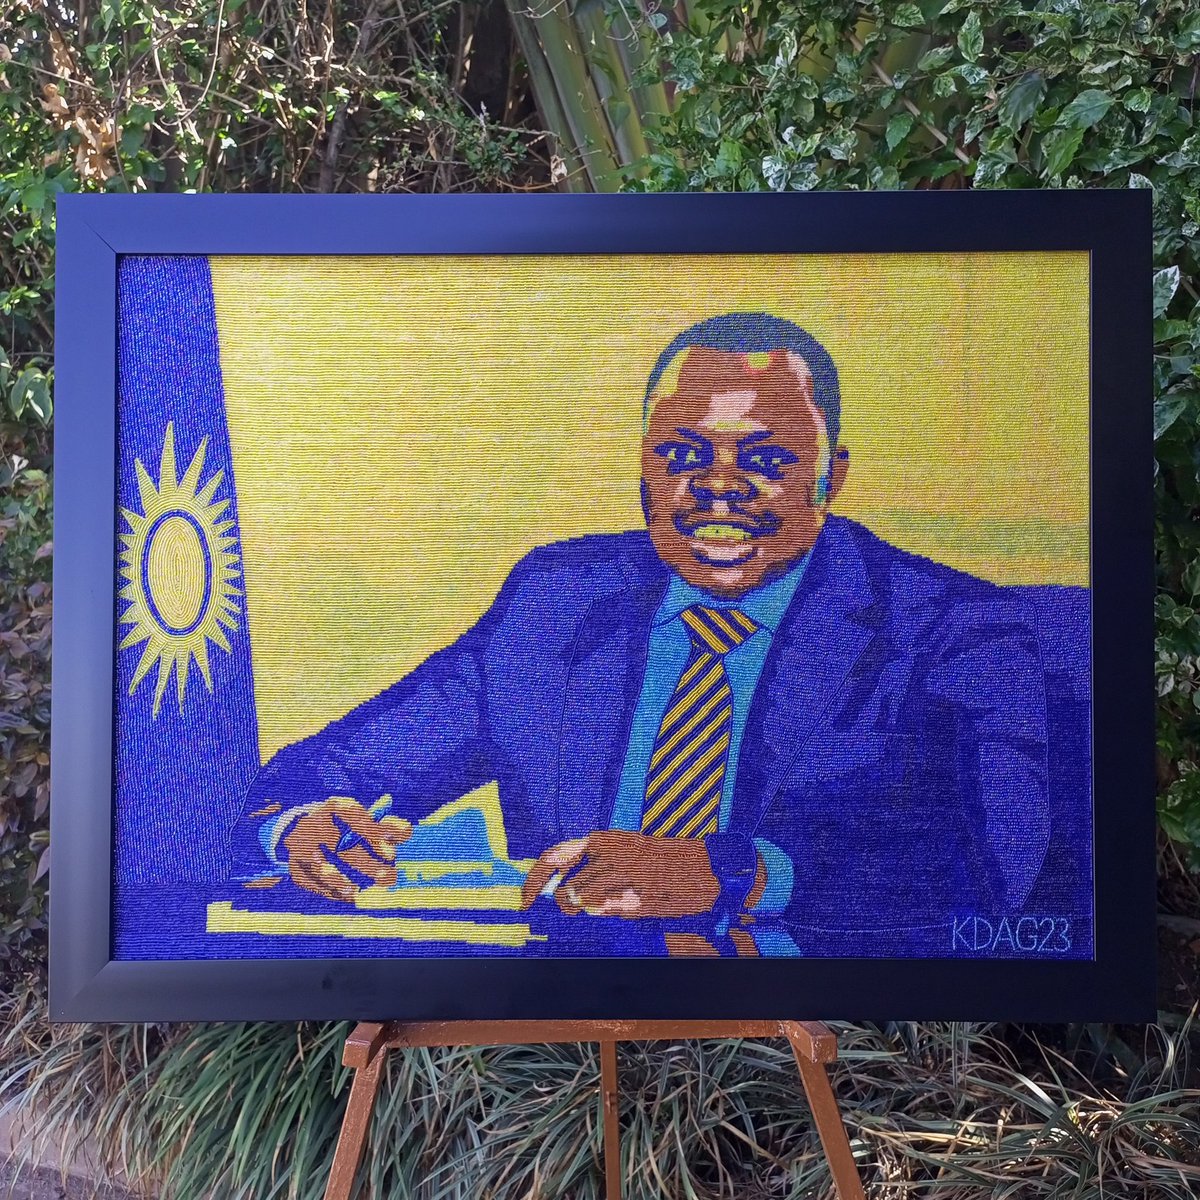 Hon Minister of Youth! @jnabdallah Deaf youth Artists are delighted to showcase this portrait of yours in line of empowering youth Artists and promoting their talent as well. We are seeking your support to raise funds that will enable the ongoing art activities. @MiniYouthRwanda